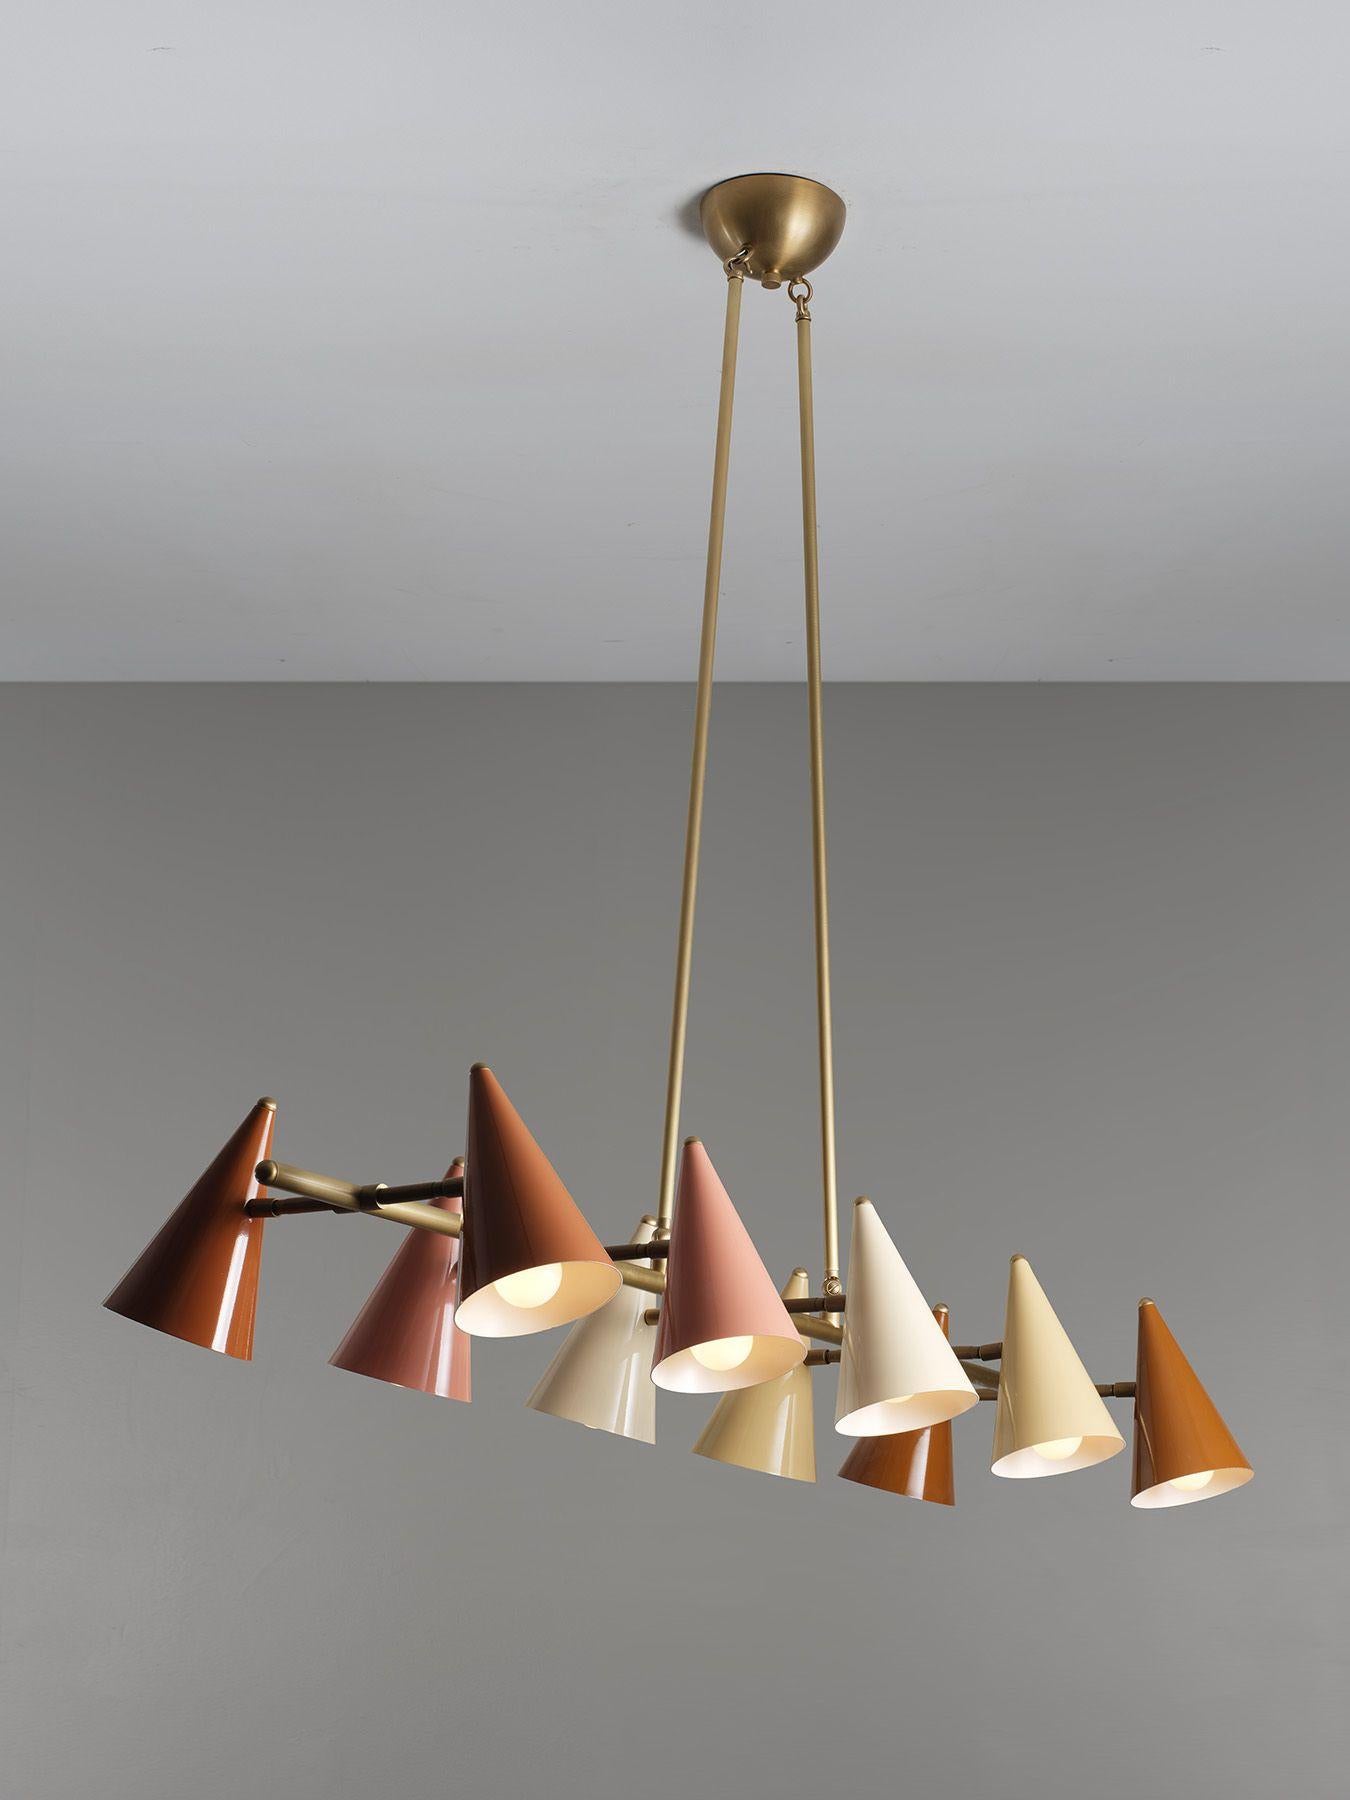 The Flotilla ceiling fixture designed by Blueprint Lighting; a playful piece of functional sculpture inspired by the 